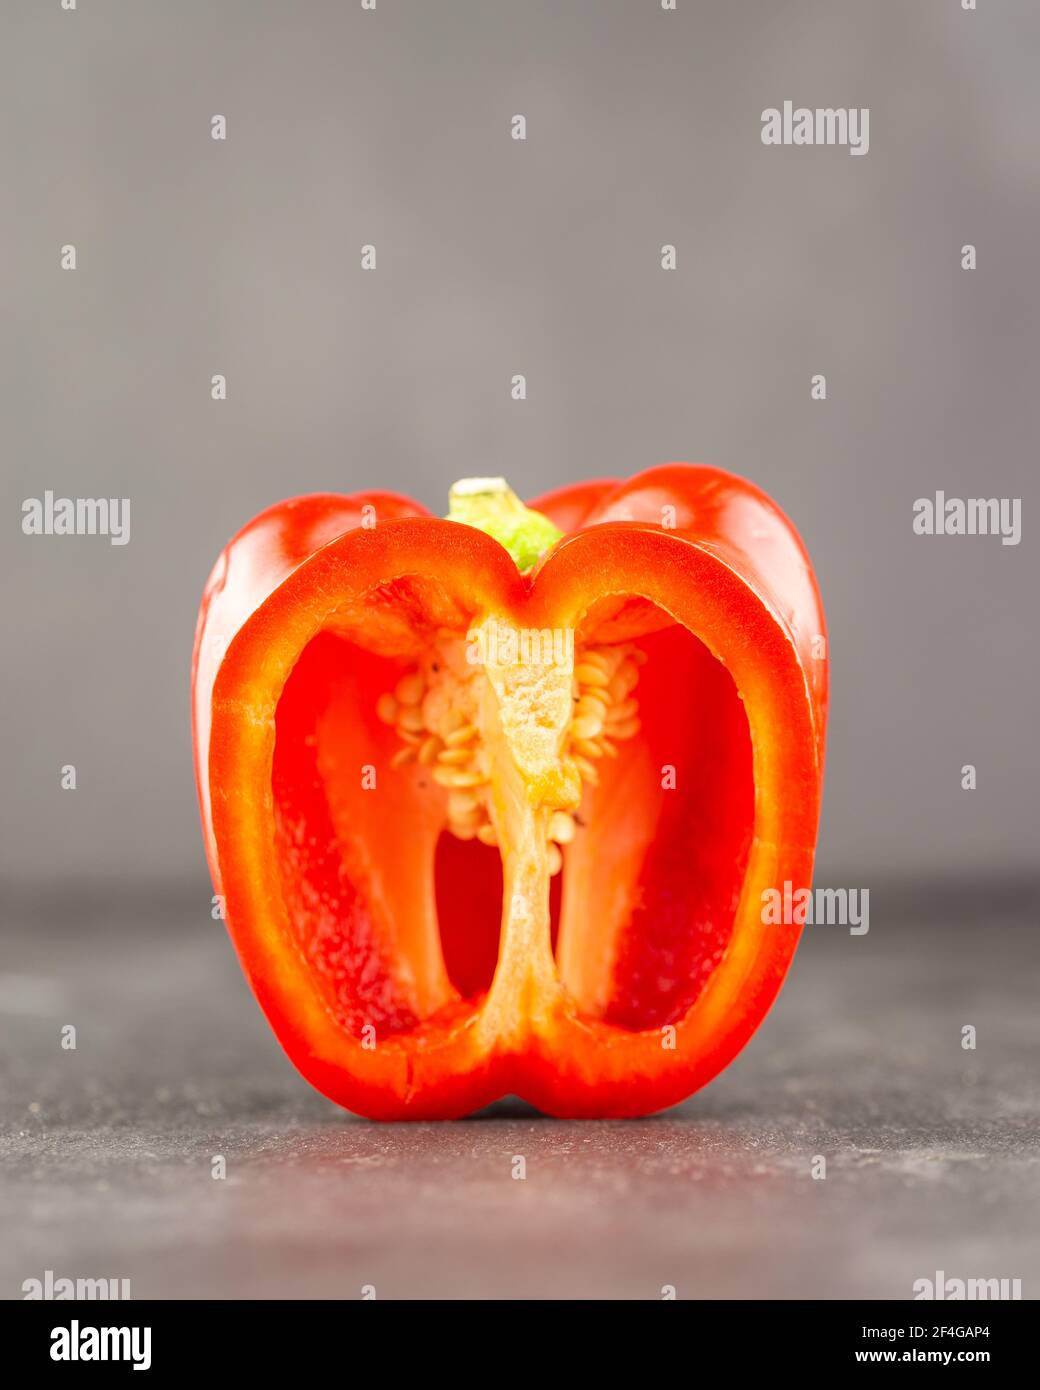 red bell pepper cross section Stock Photo